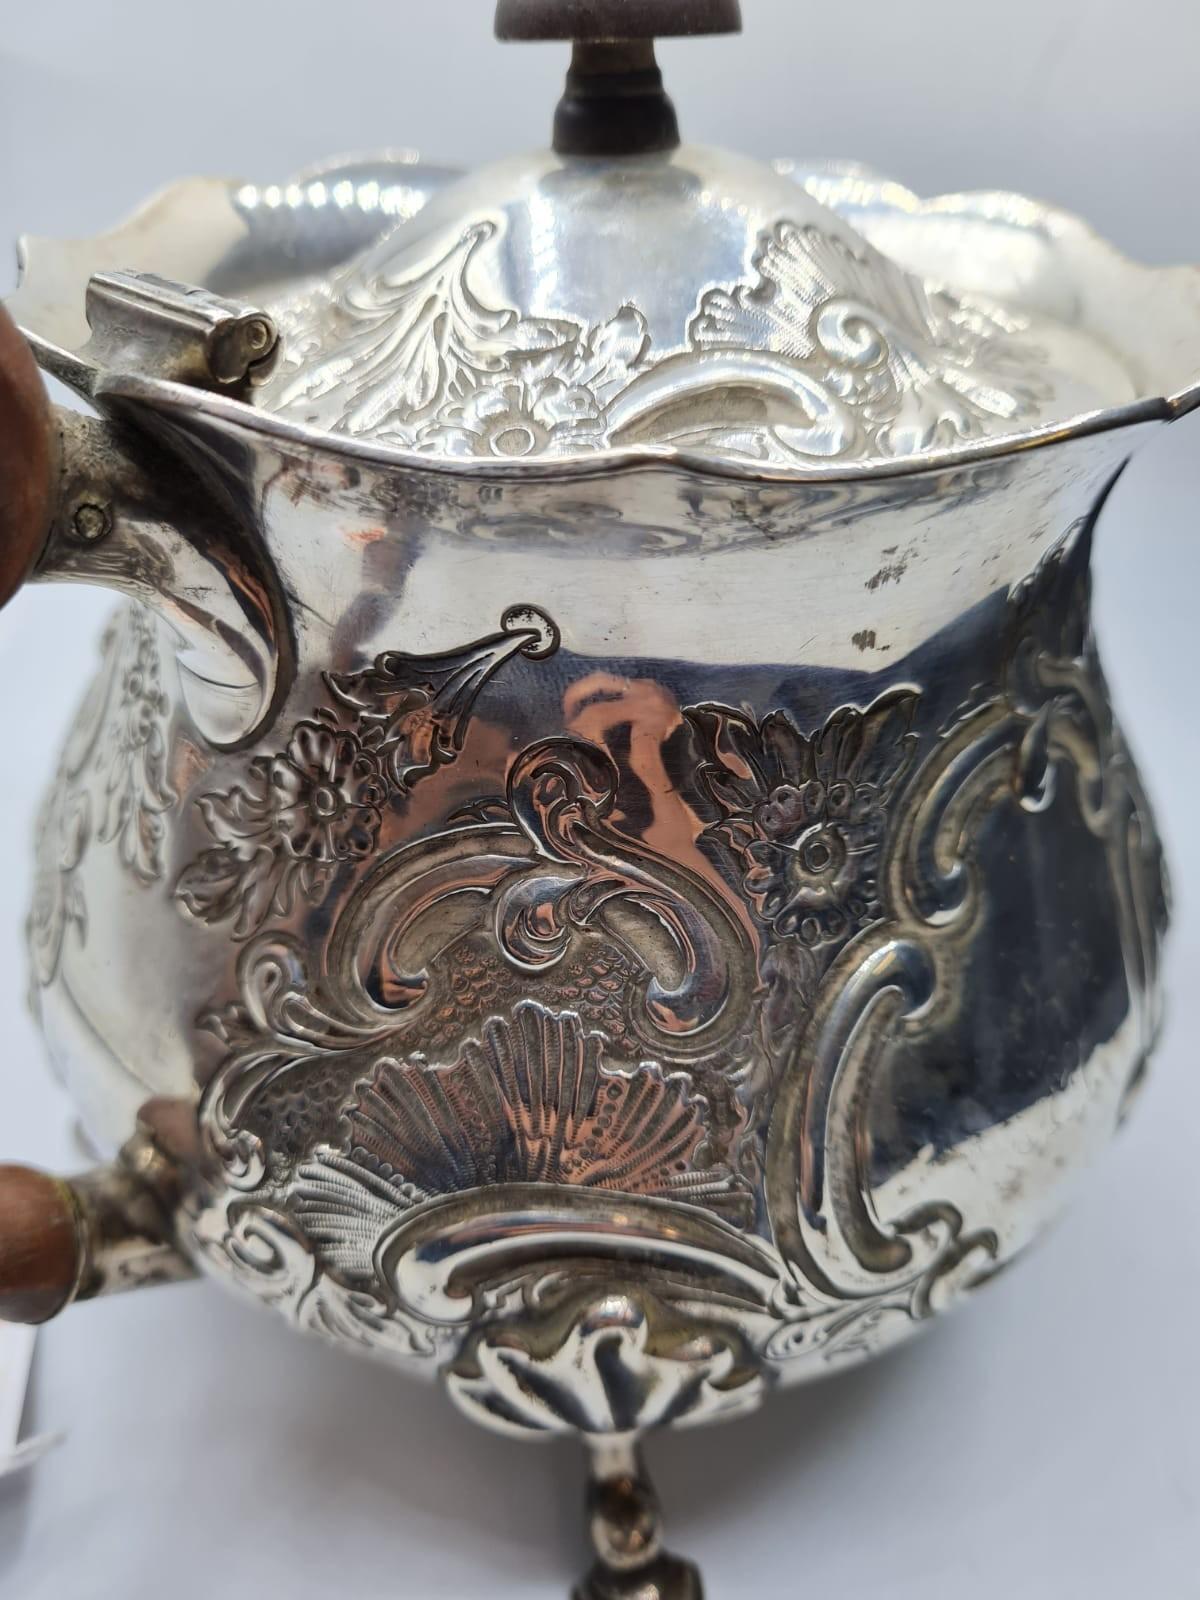 1920 Ornate Silver Teapot 766g - Image 6 of 8